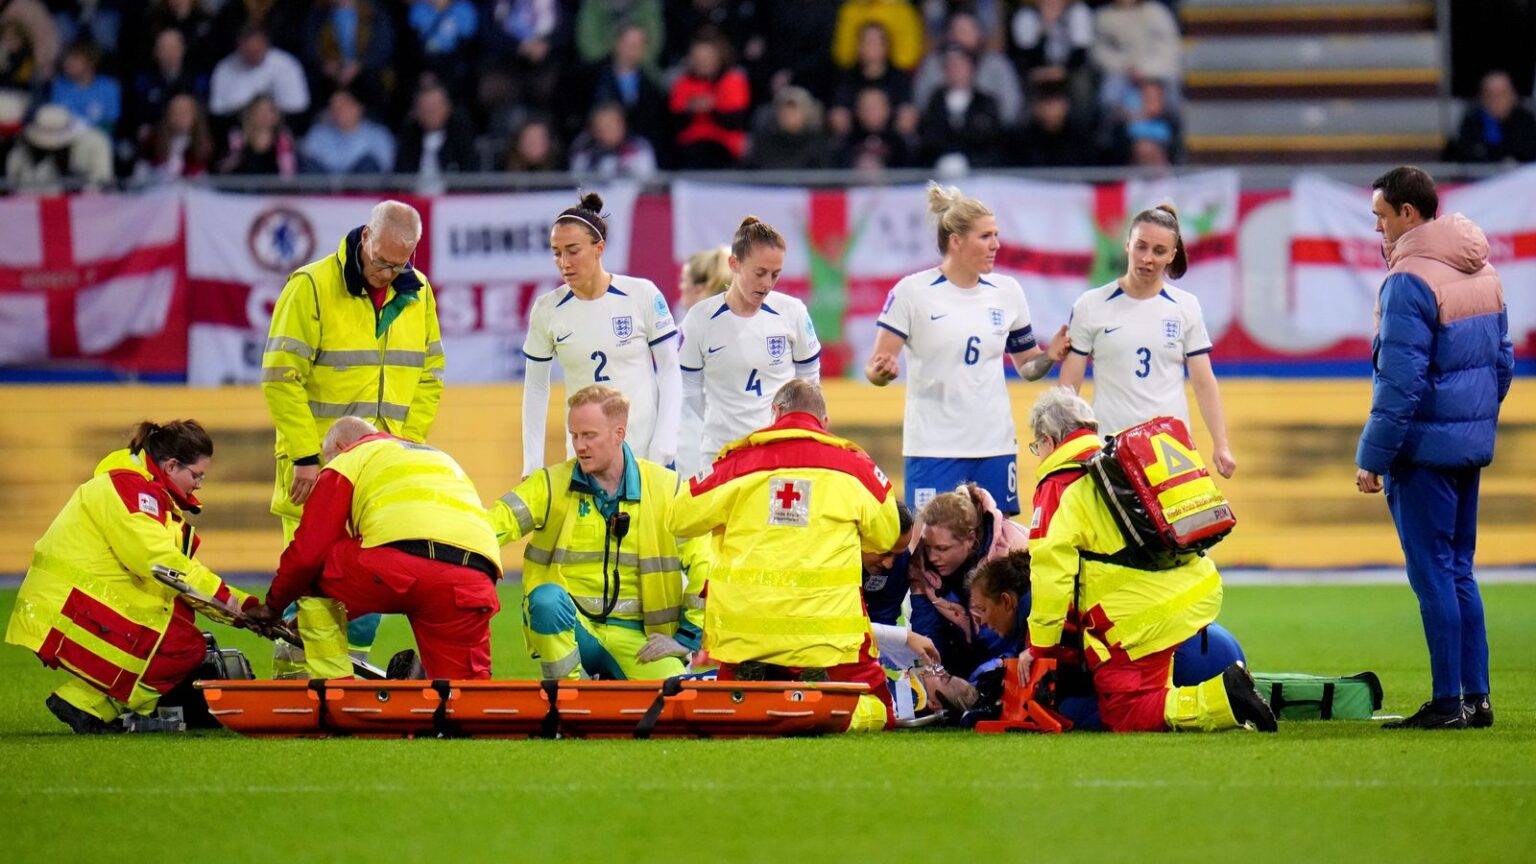 England’s Alex Greenwood carried off on stretcher after head clash